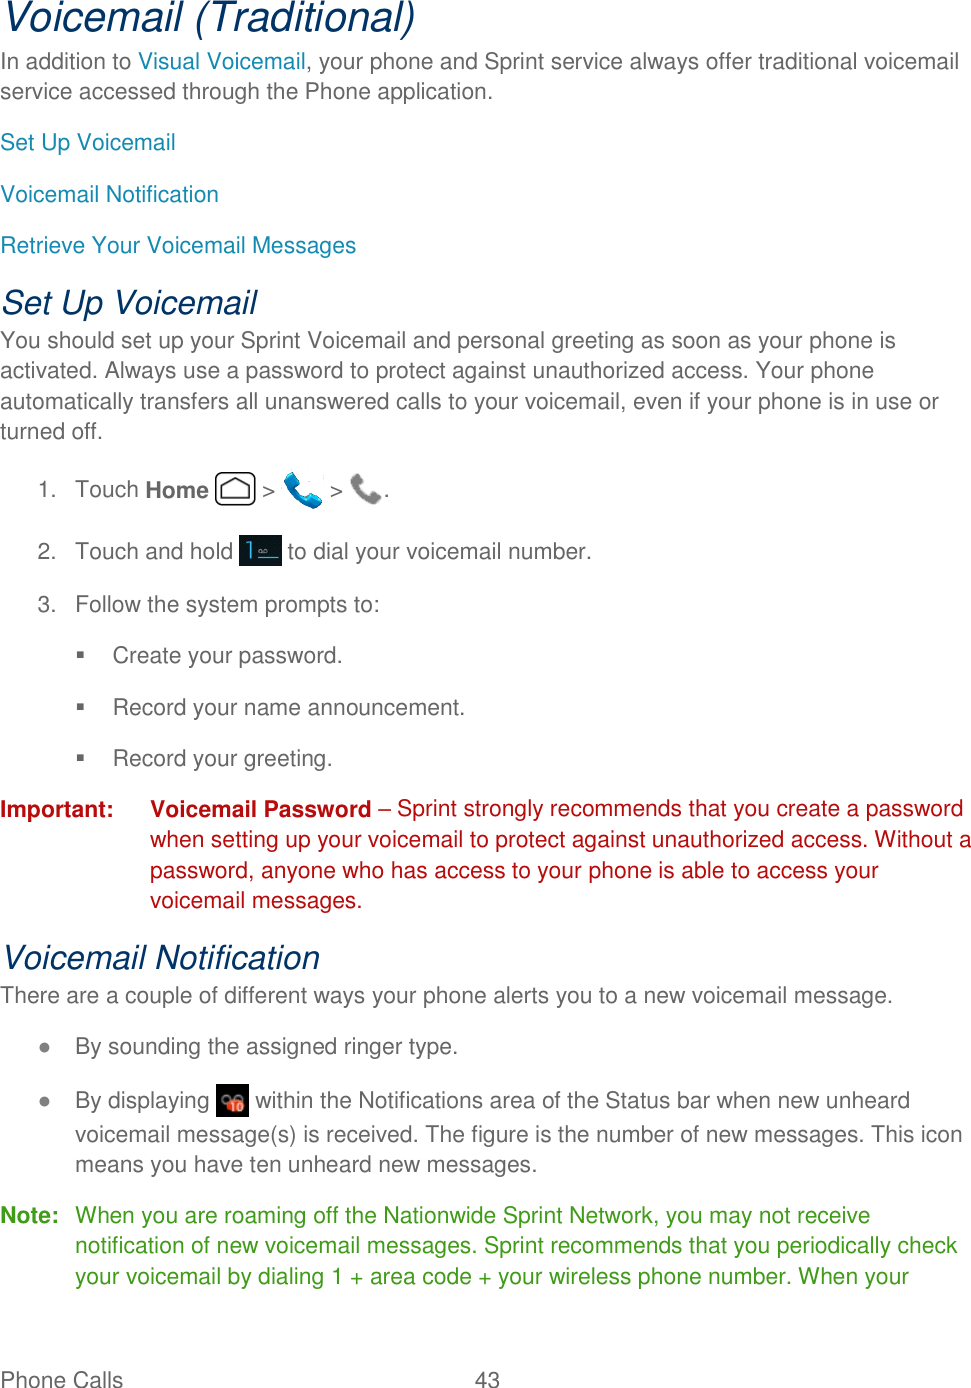 Phone Calls  43   Voicemail (Traditional) In addition to Visual Voicemail, your phone and Sprint service always offer traditional voicemail service accessed through the Phone application. Set Up Voicemail Voicemail Notification Retrieve Your Voicemail Messages Set Up Voicemail You should set up your Sprint Voicemail and personal greeting as soon as your phone is activated. Always use a password to protect against unauthorized access. Your phone automatically transfers all unanswered calls to your voicemail, even if your phone is in use or turned off.  1.  Touch Home   &gt;   &gt;  .  2.  Touch and hold   to dial your voicemail number. 3.  Follow the system prompts to:   Create your password.   Record your name announcement.   Record your greeting. Important:  Voicemail Password – Sprint strongly recommends that you create a password when setting up your voicemail to protect against unauthorized access. Without a password, anyone who has access to your phone is able to access your voicemail messages. Voicemail Notification There are a couple of different ways your phone alerts you to a new voicemail message. ● By sounding the assigned ringer type. ● By displaying   within the Notifications area of the Status bar when new unheard voicemail message(s) is received. The figure is the number of new messages. This icon means you have ten unheard new messages. Note:  When you are roaming off the Nationwide Sprint Network, you may not receive notification of new voicemail messages. Sprint recommends that you periodically check your voicemail by dialing 1 + area code + your wireless phone number. When your 